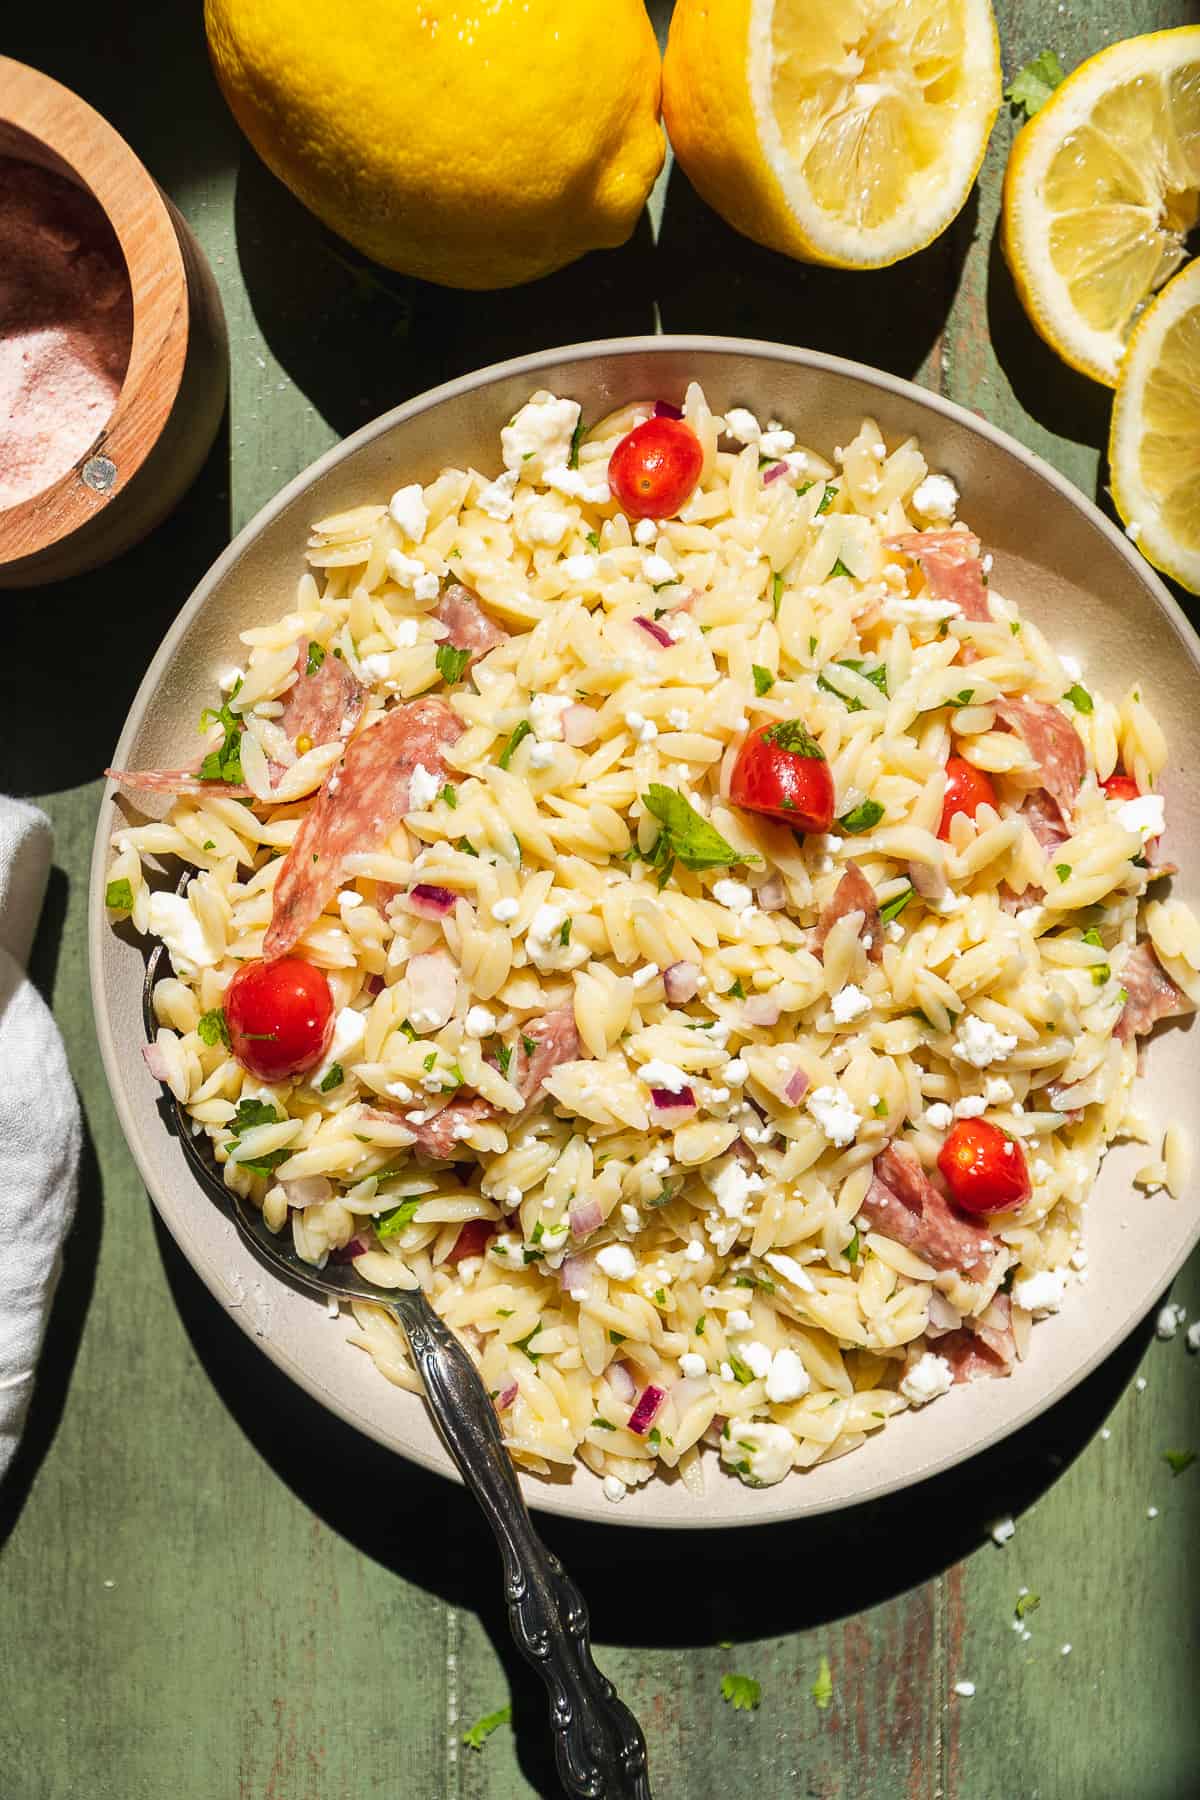 Overhead view of a dish with lemon orzo pasta salad.